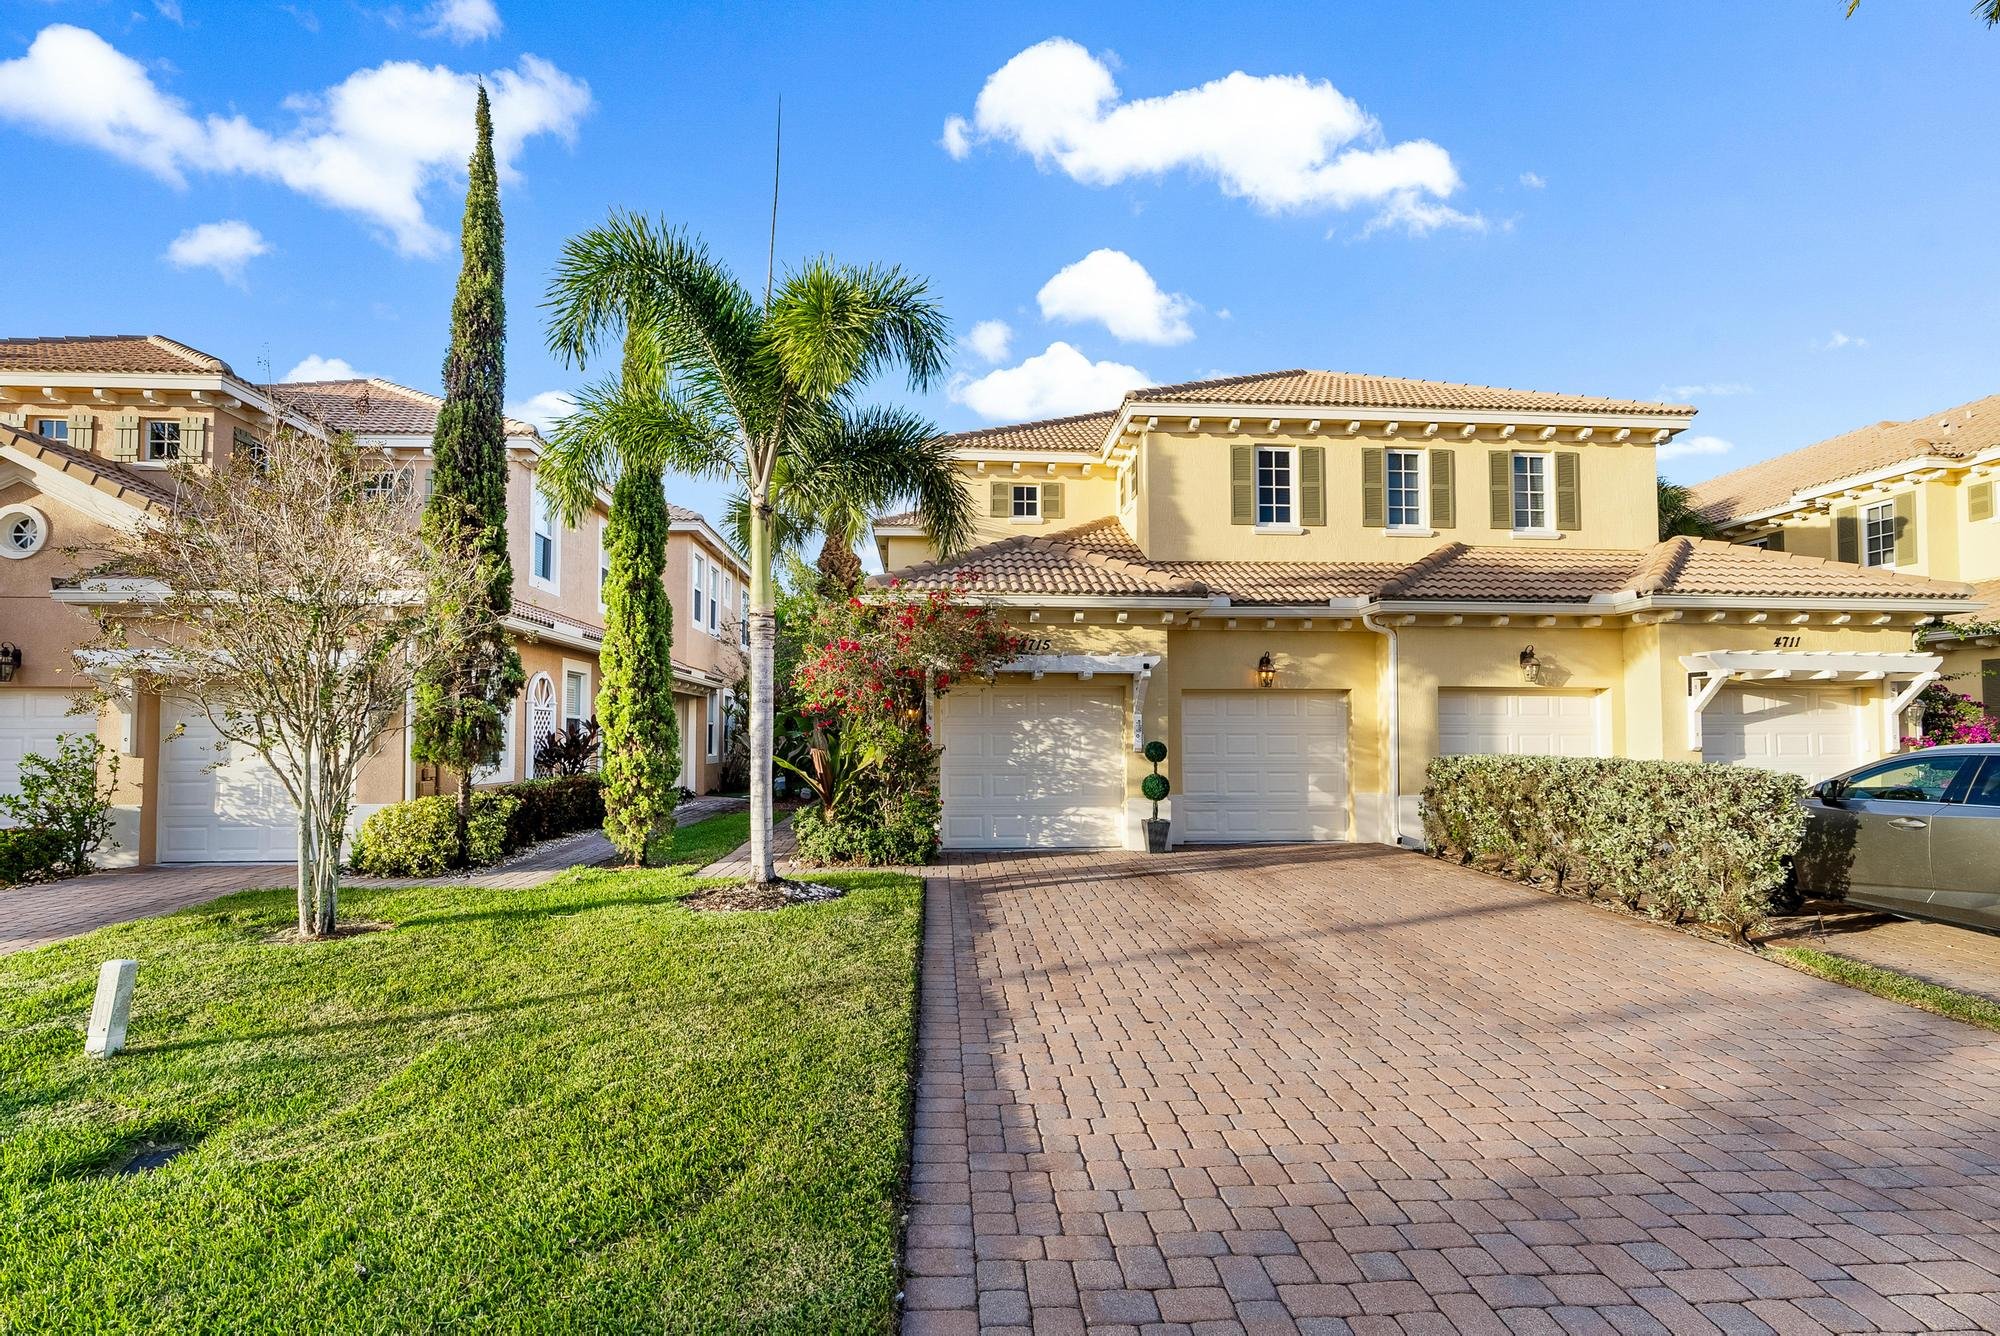 townhome for sale in paloma of palm beach gardens florida